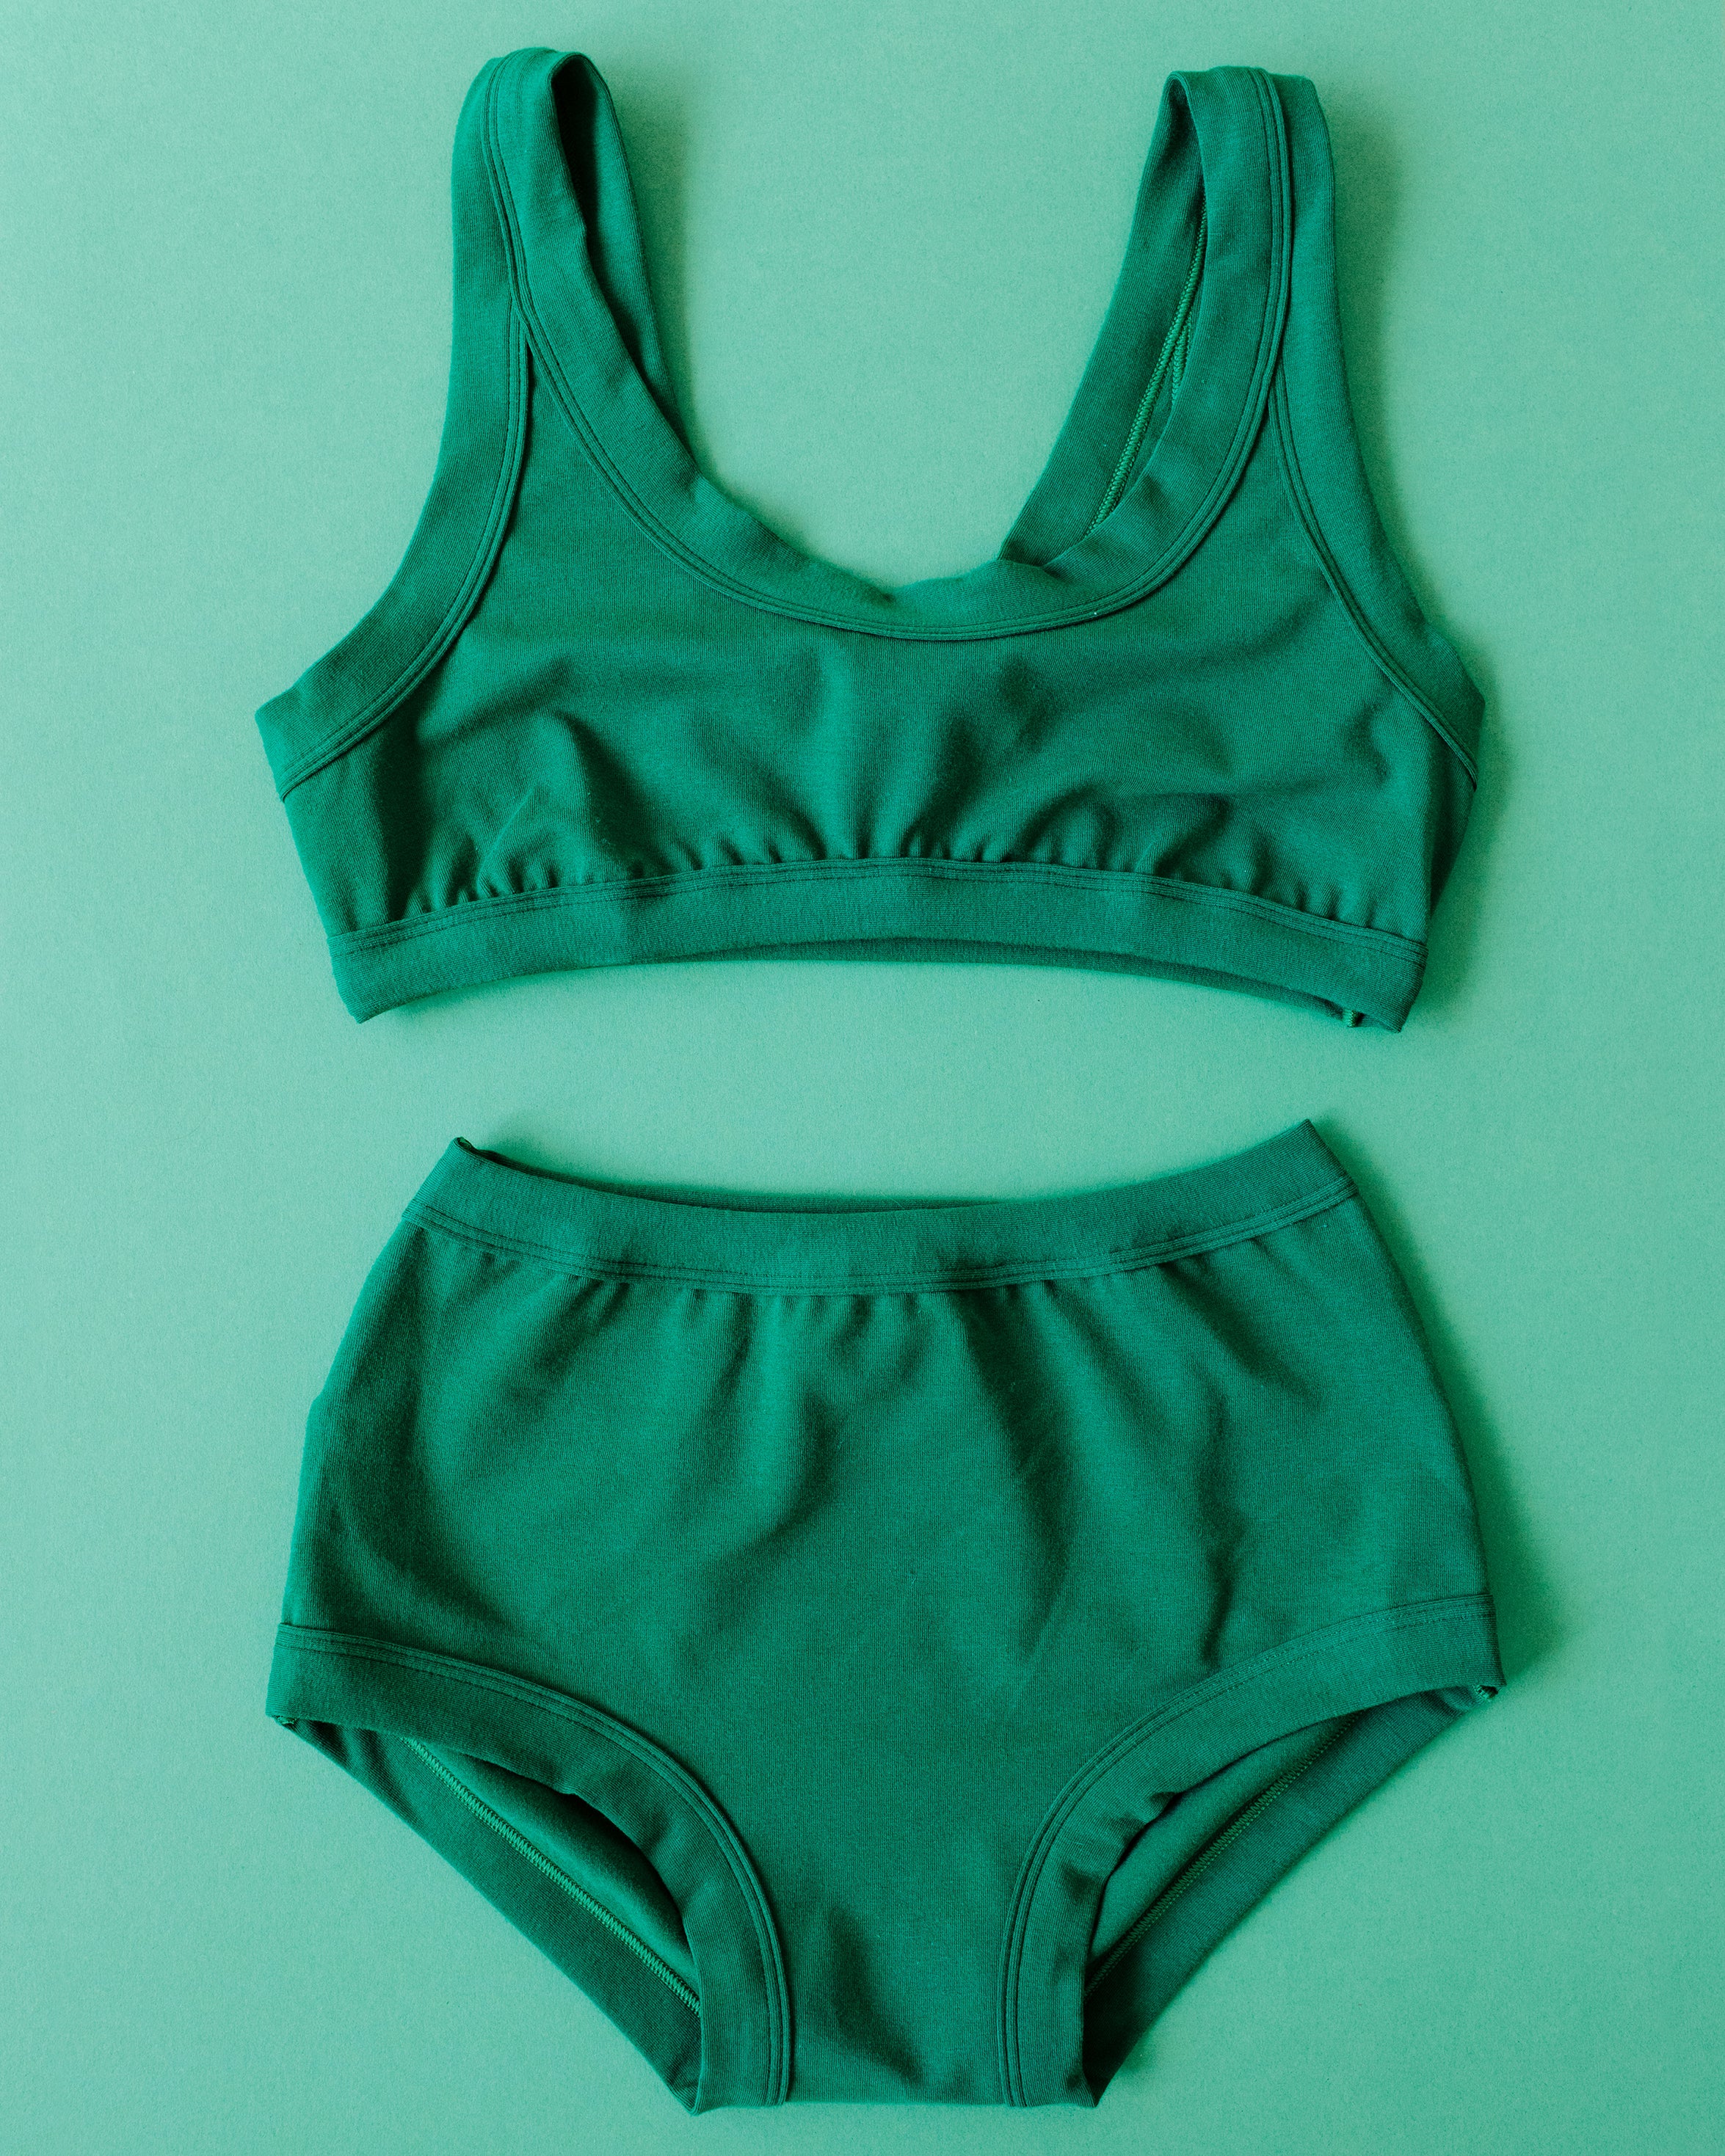 Flat lay of Thunderpants Bralette and Original style underwear set in Emerald Green.